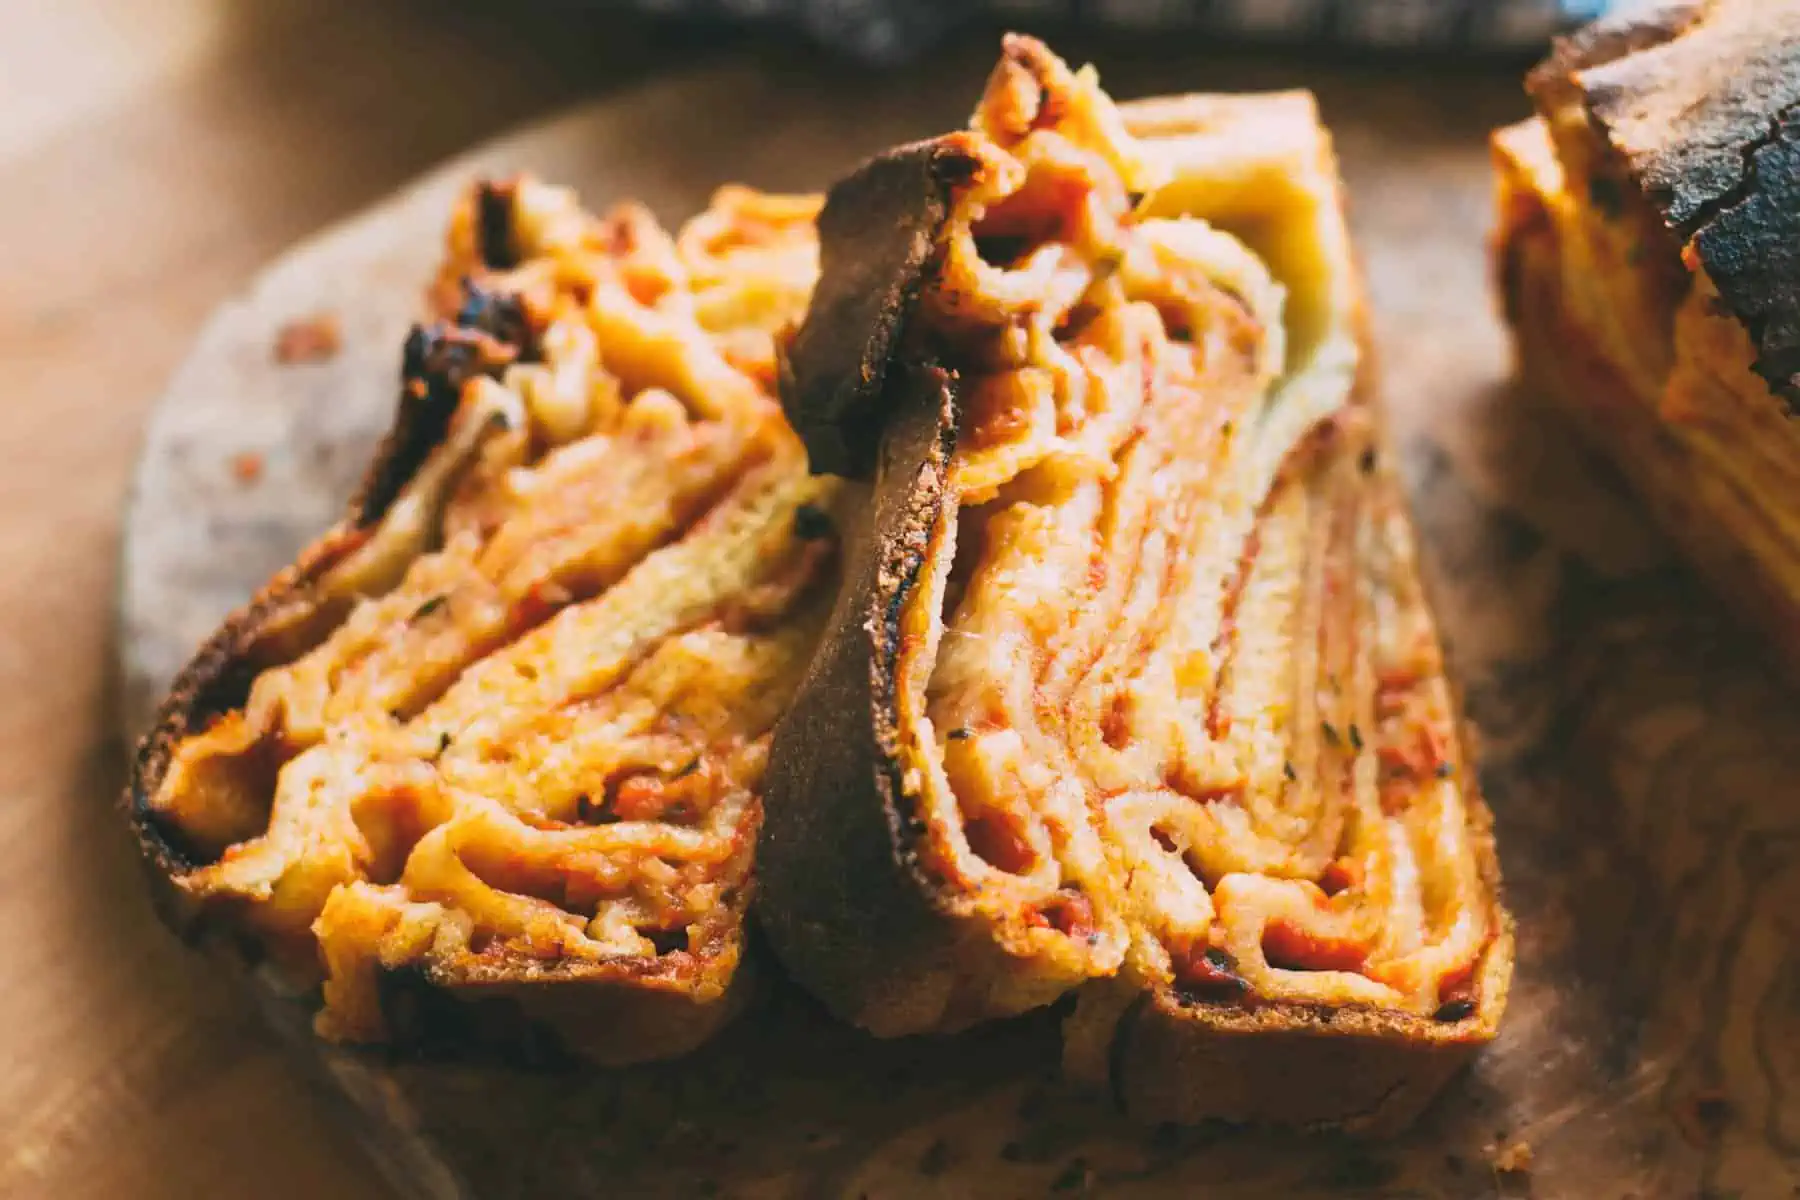 Thick slices of cooked pizza babka.